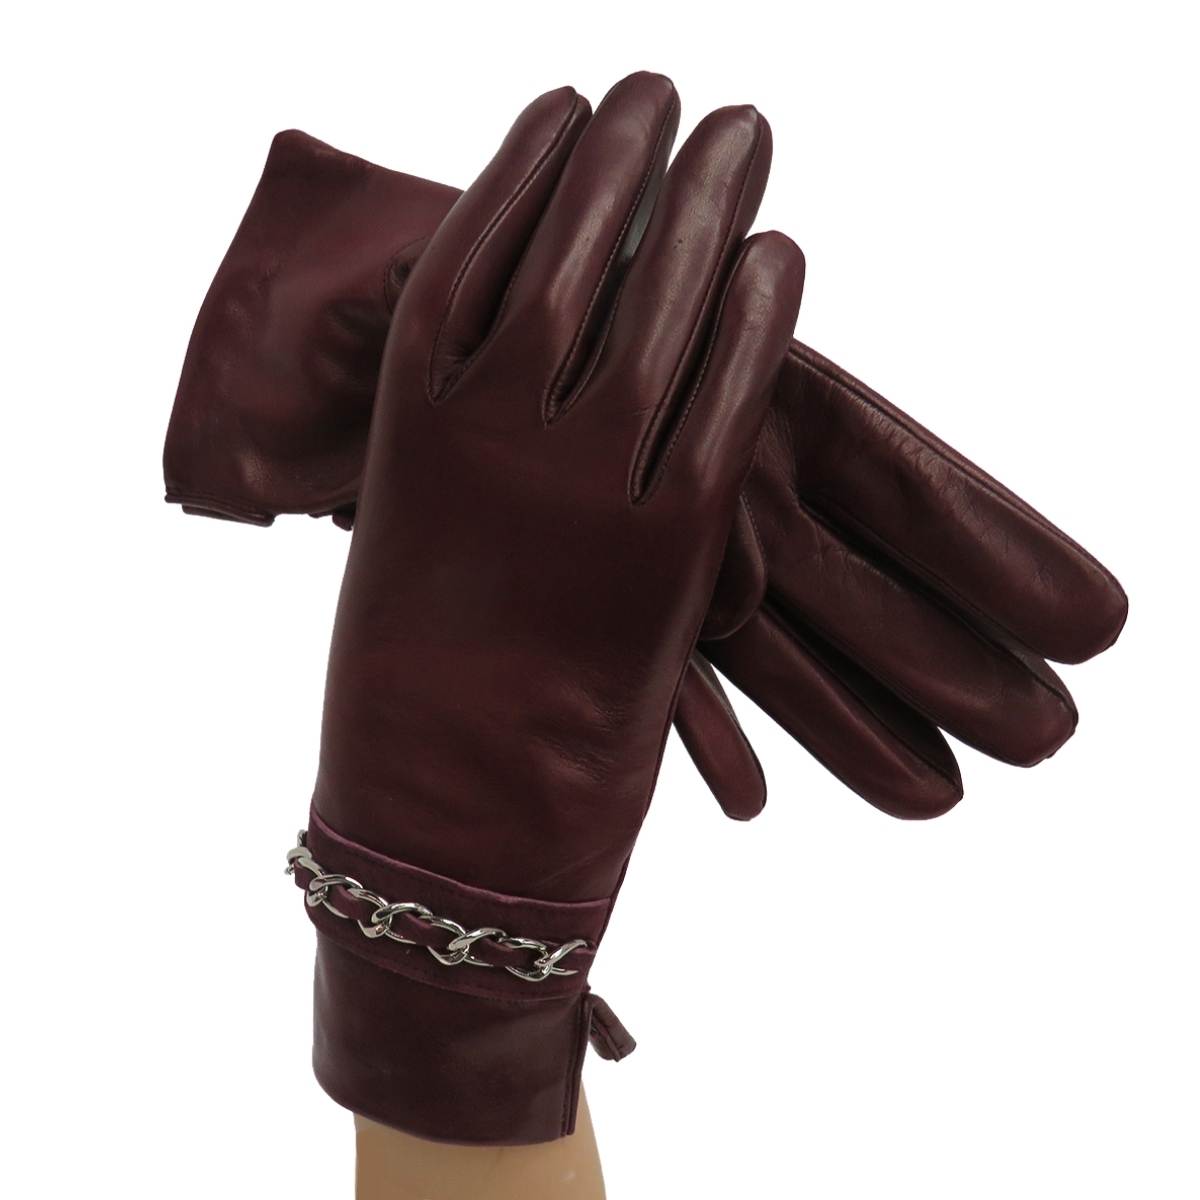 Leather Glove with chain bracelet